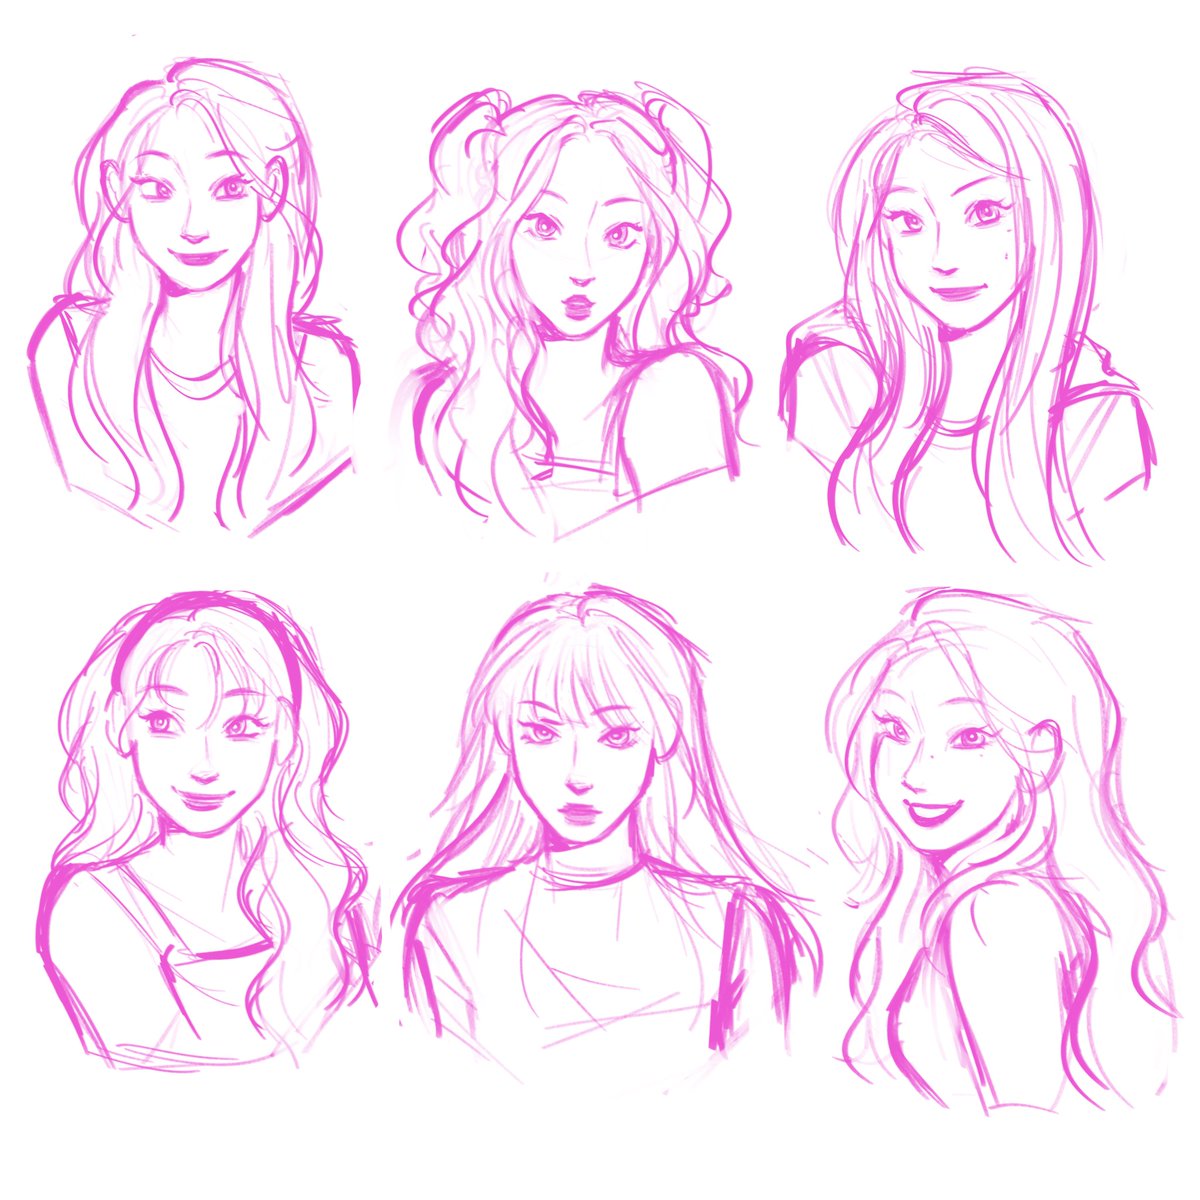 sketched the Girls in my artstyle… r u able to tell/guess who’s who…